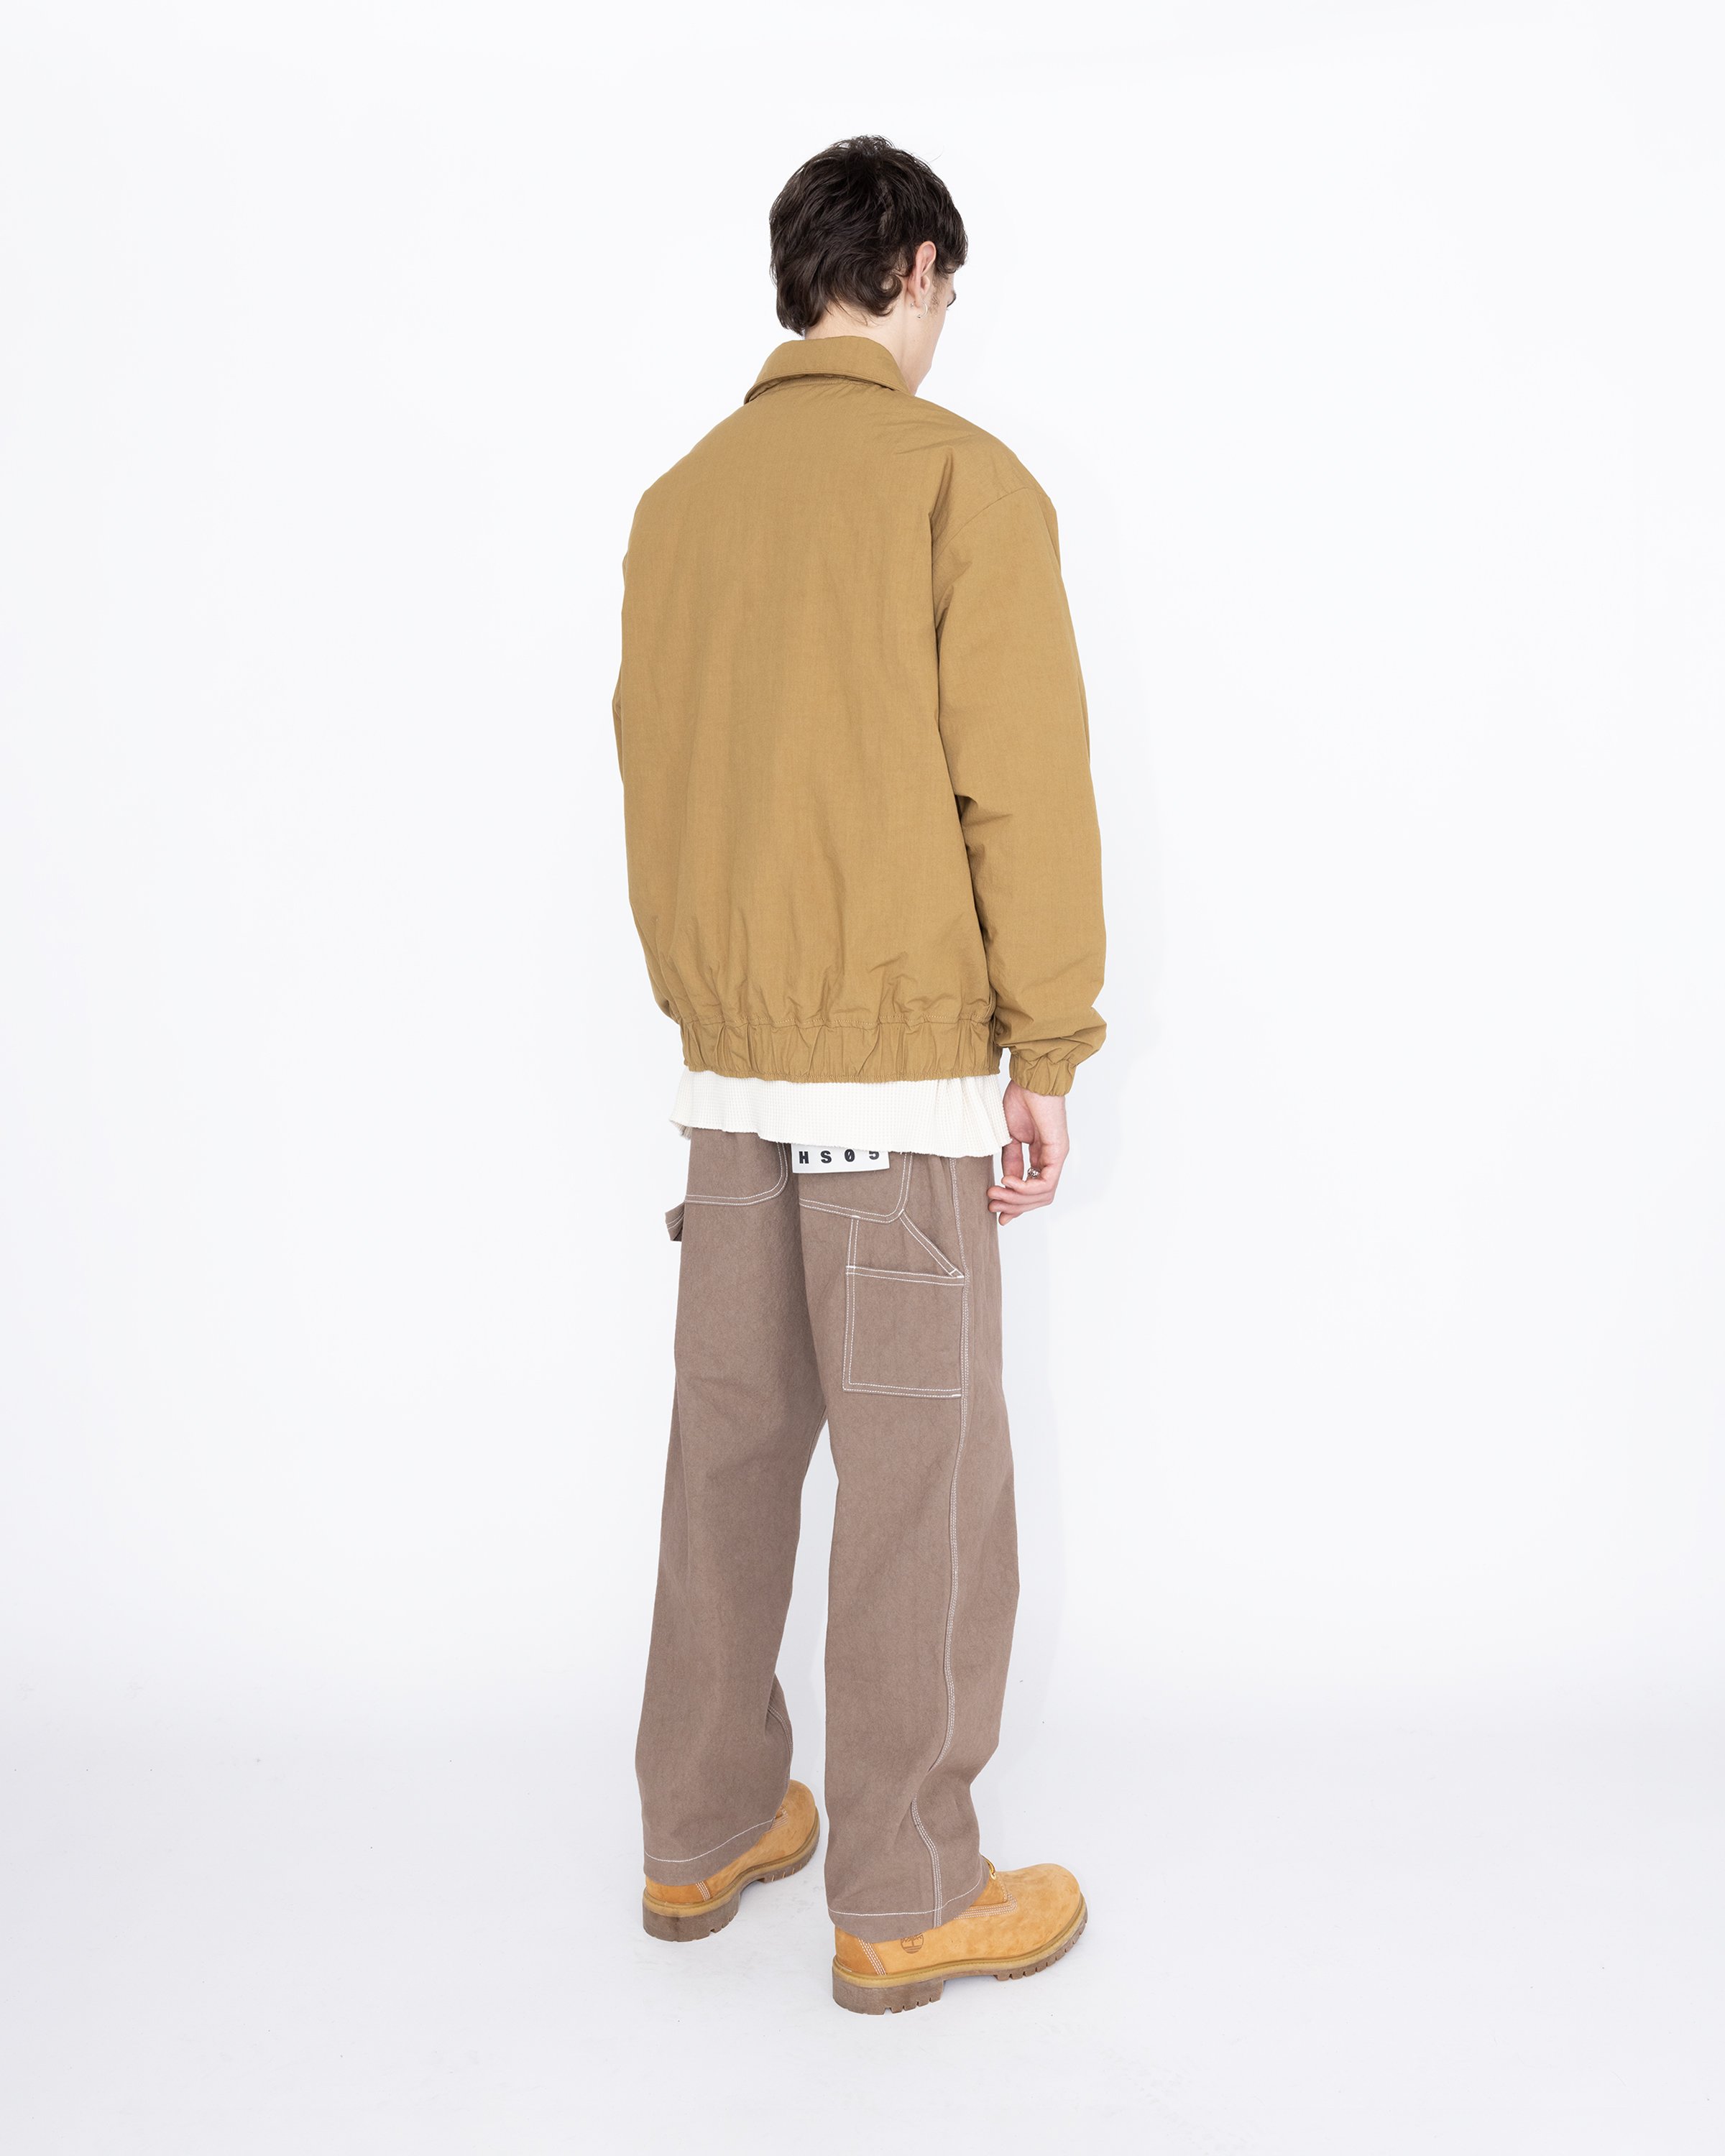 Highsnobiety HS05 - Reverse Piping Insulated Jacket Beige - Clothing - Beige - Image 5